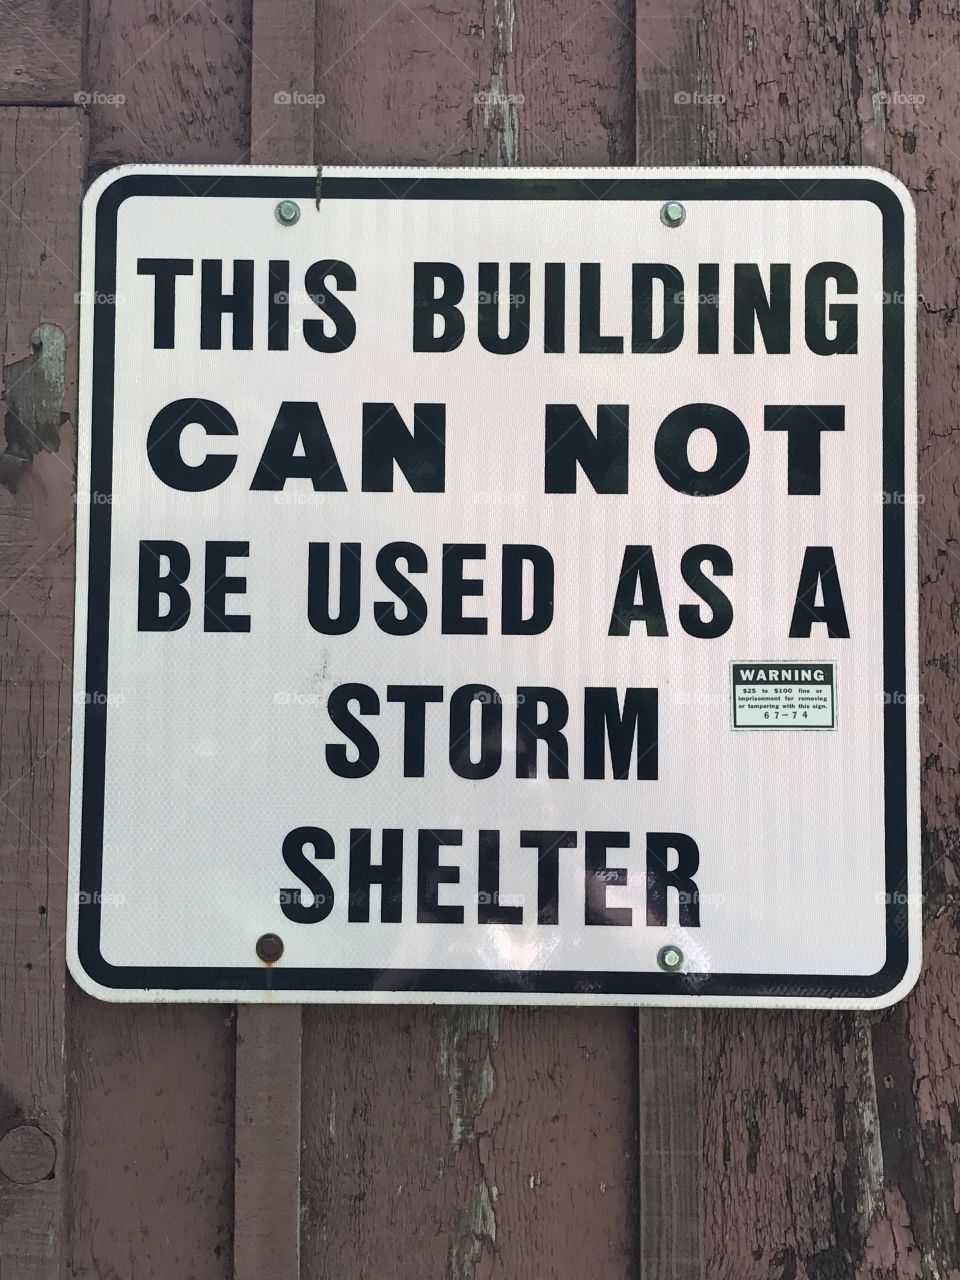 Not a shelter